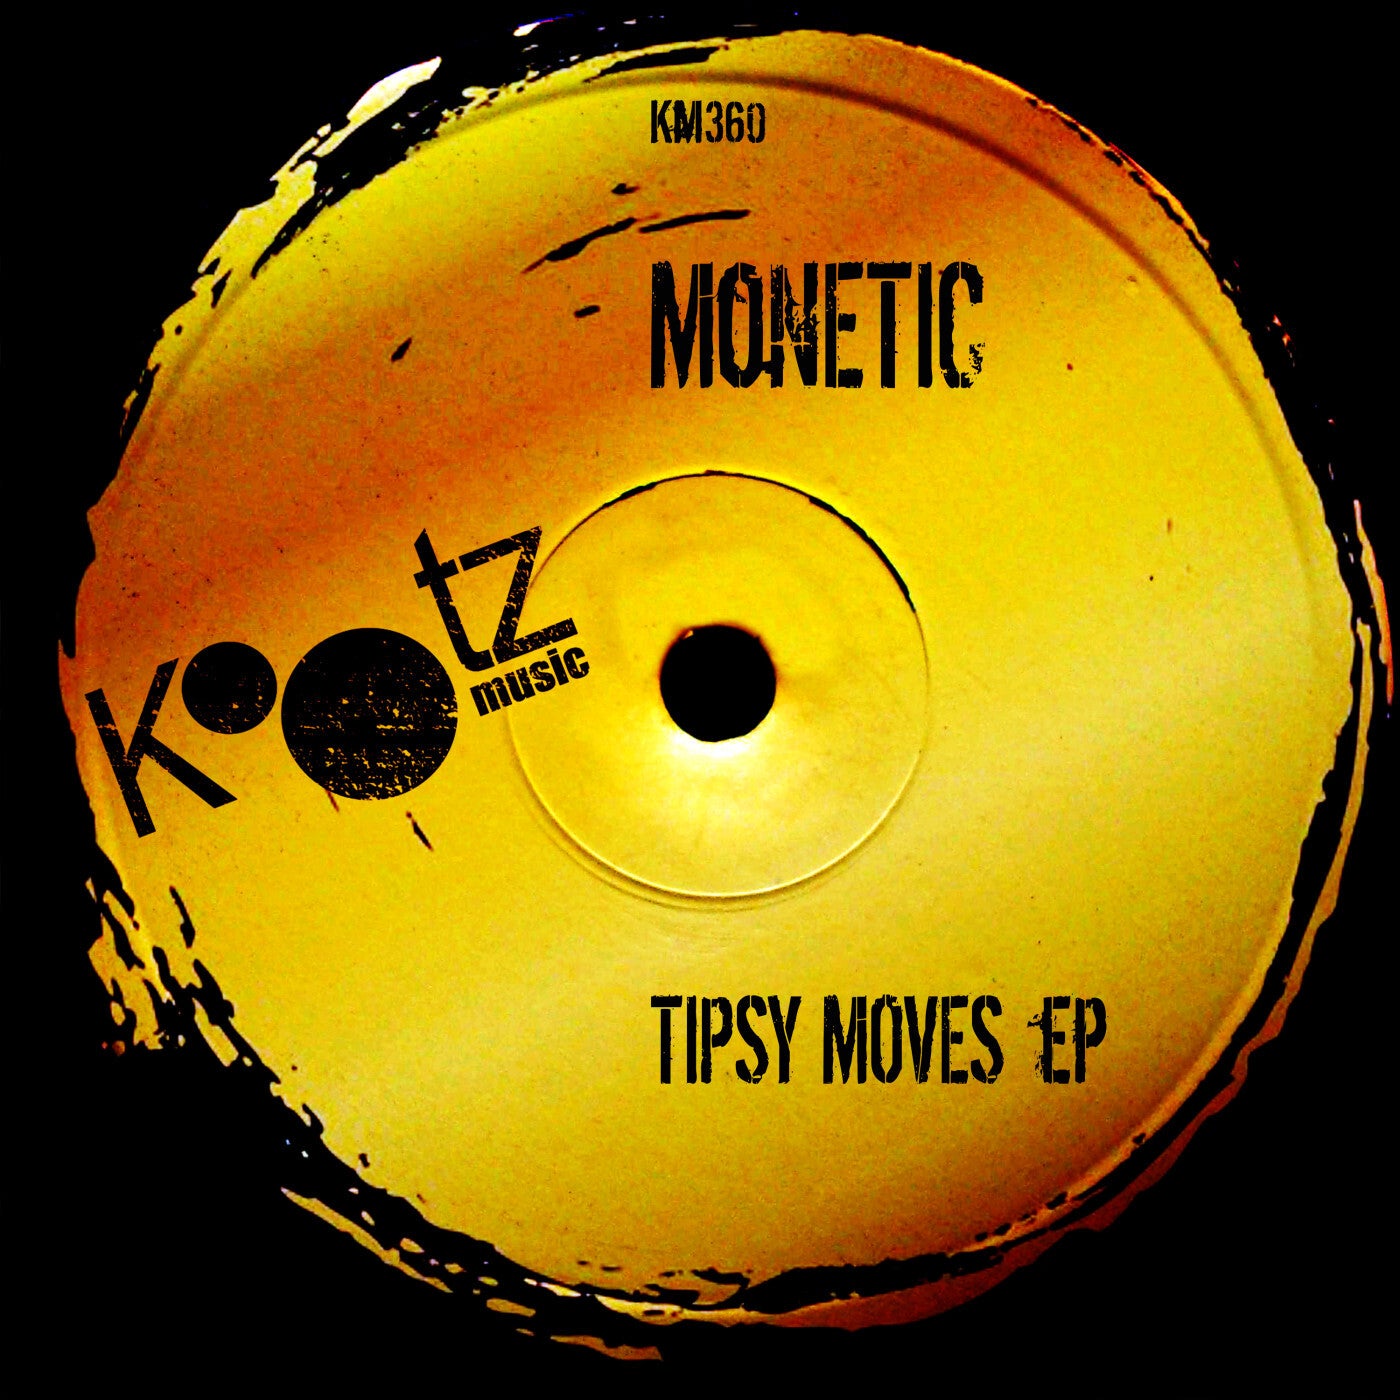 Tipsy Moves EP